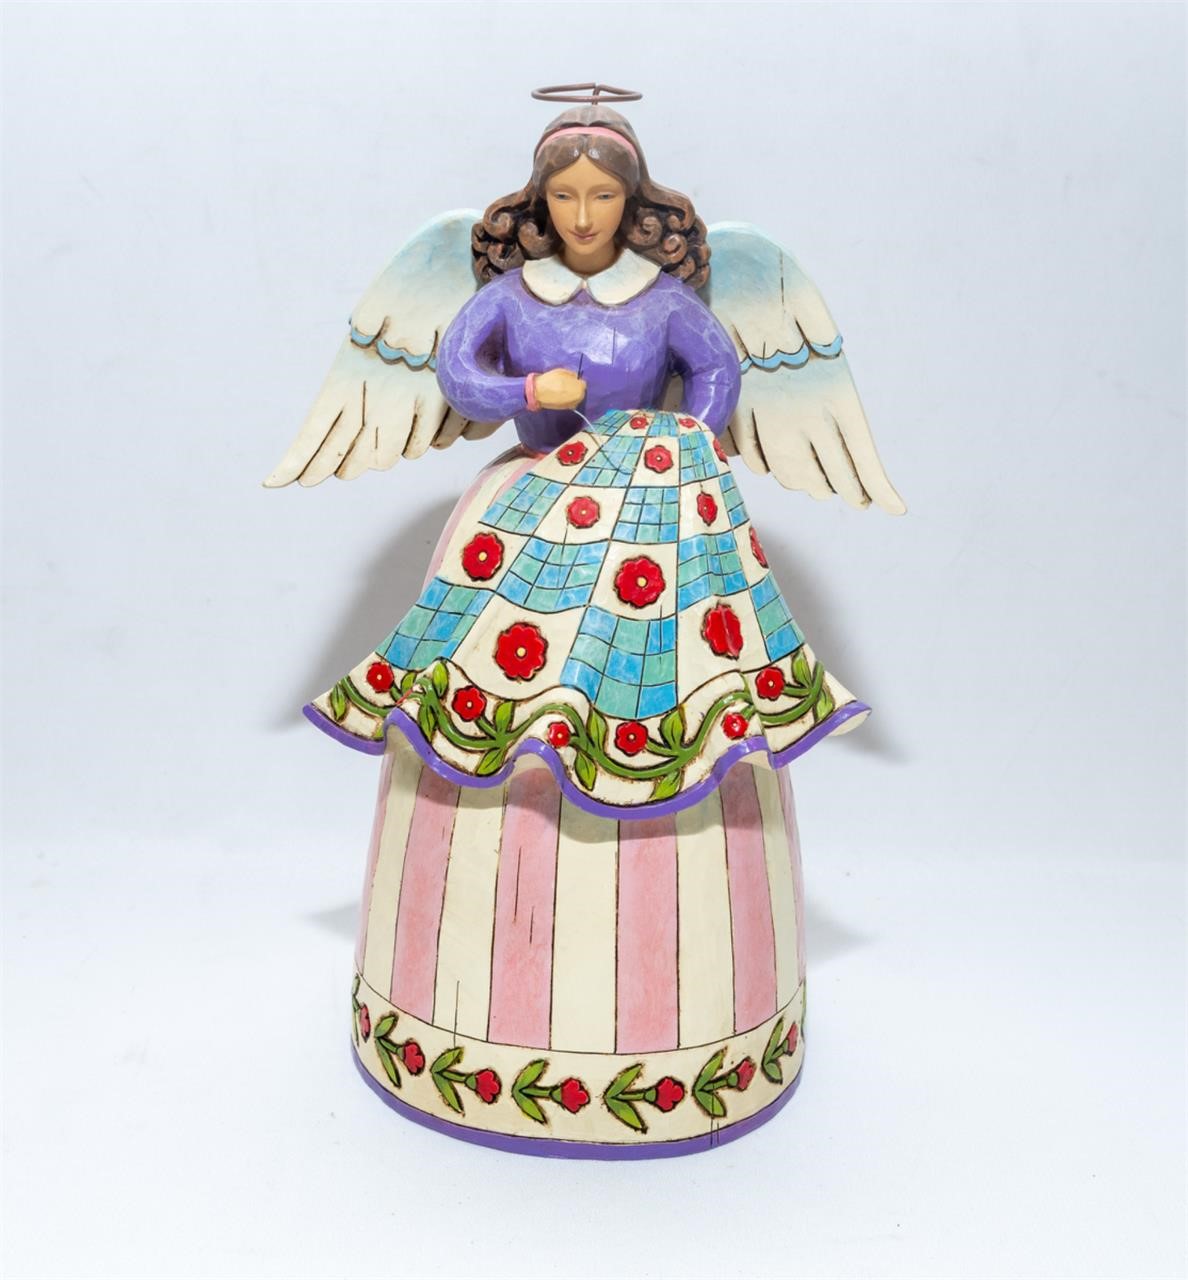 Jim Shore “Stitched With Love” angel figure.